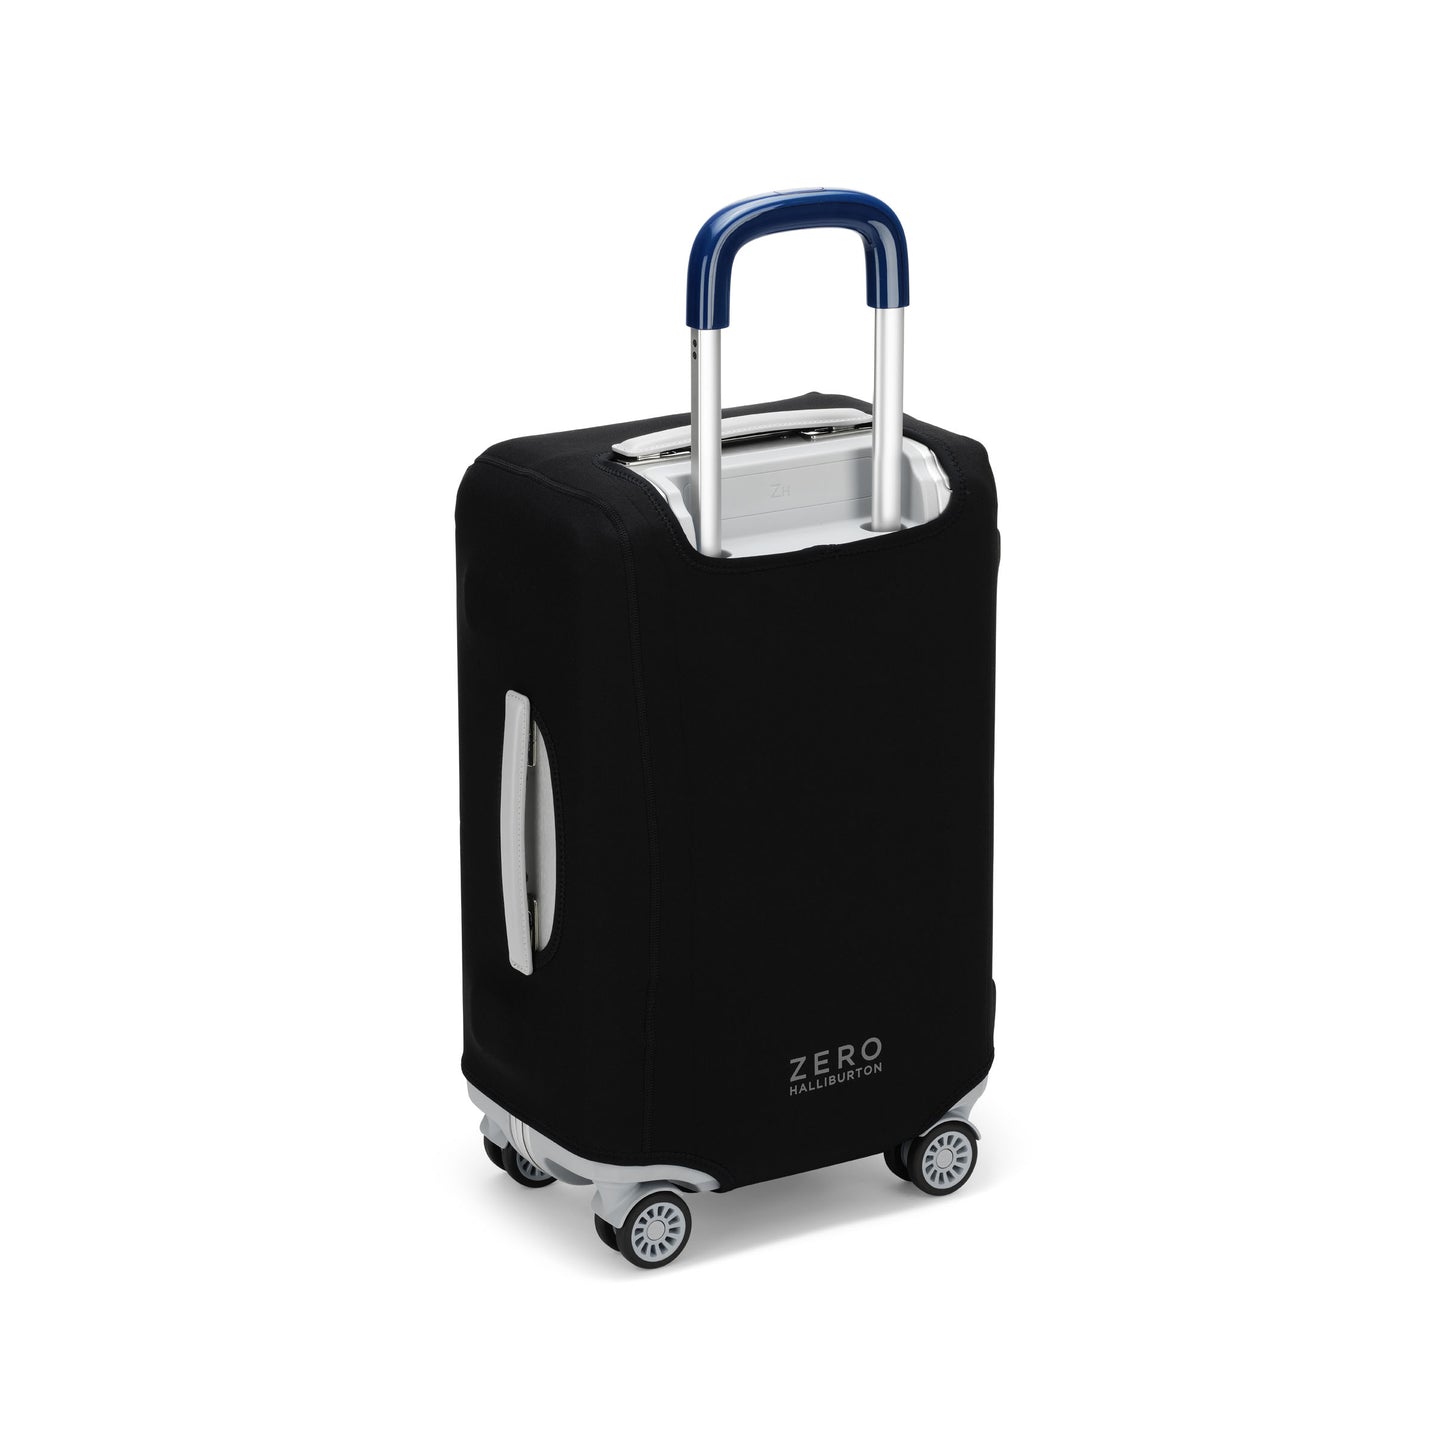 Accessories | Gen ZH Luggage Cover International